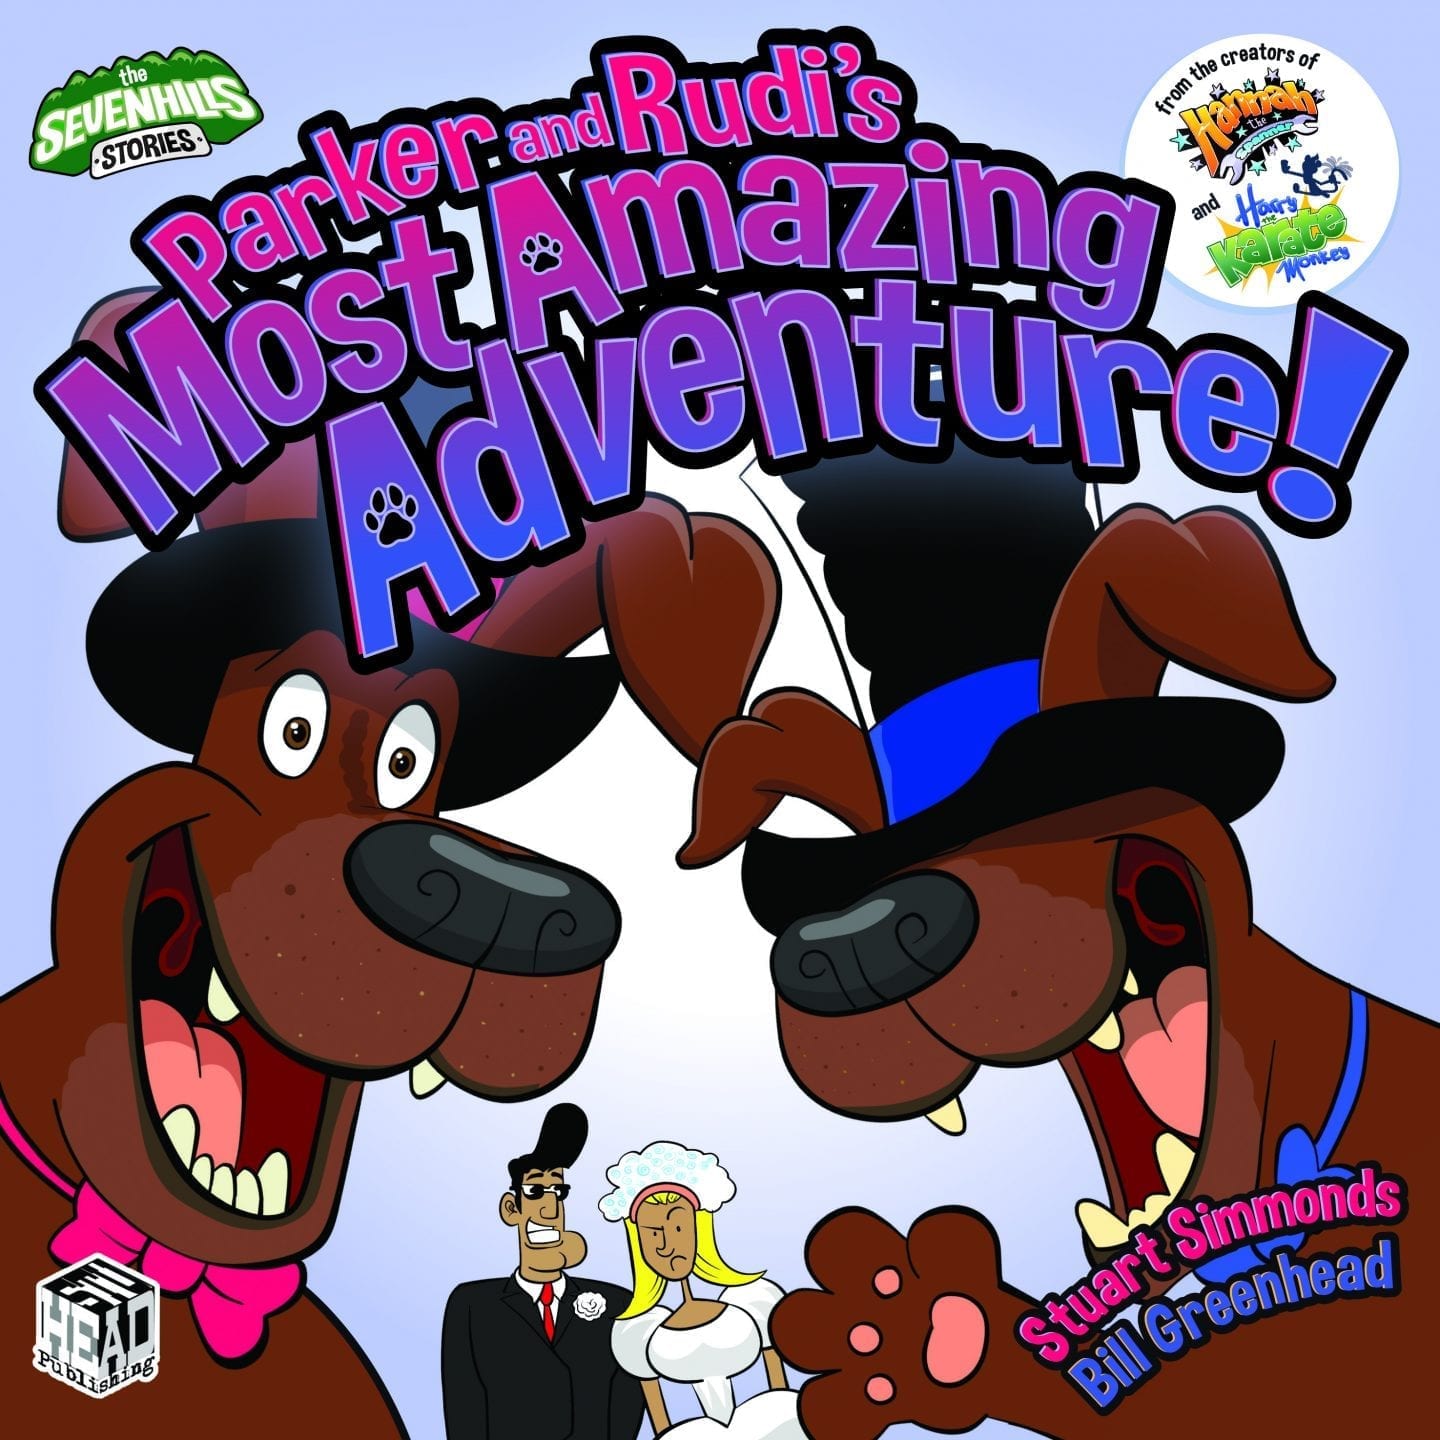 parker and rudis most amazing adventure official book cover